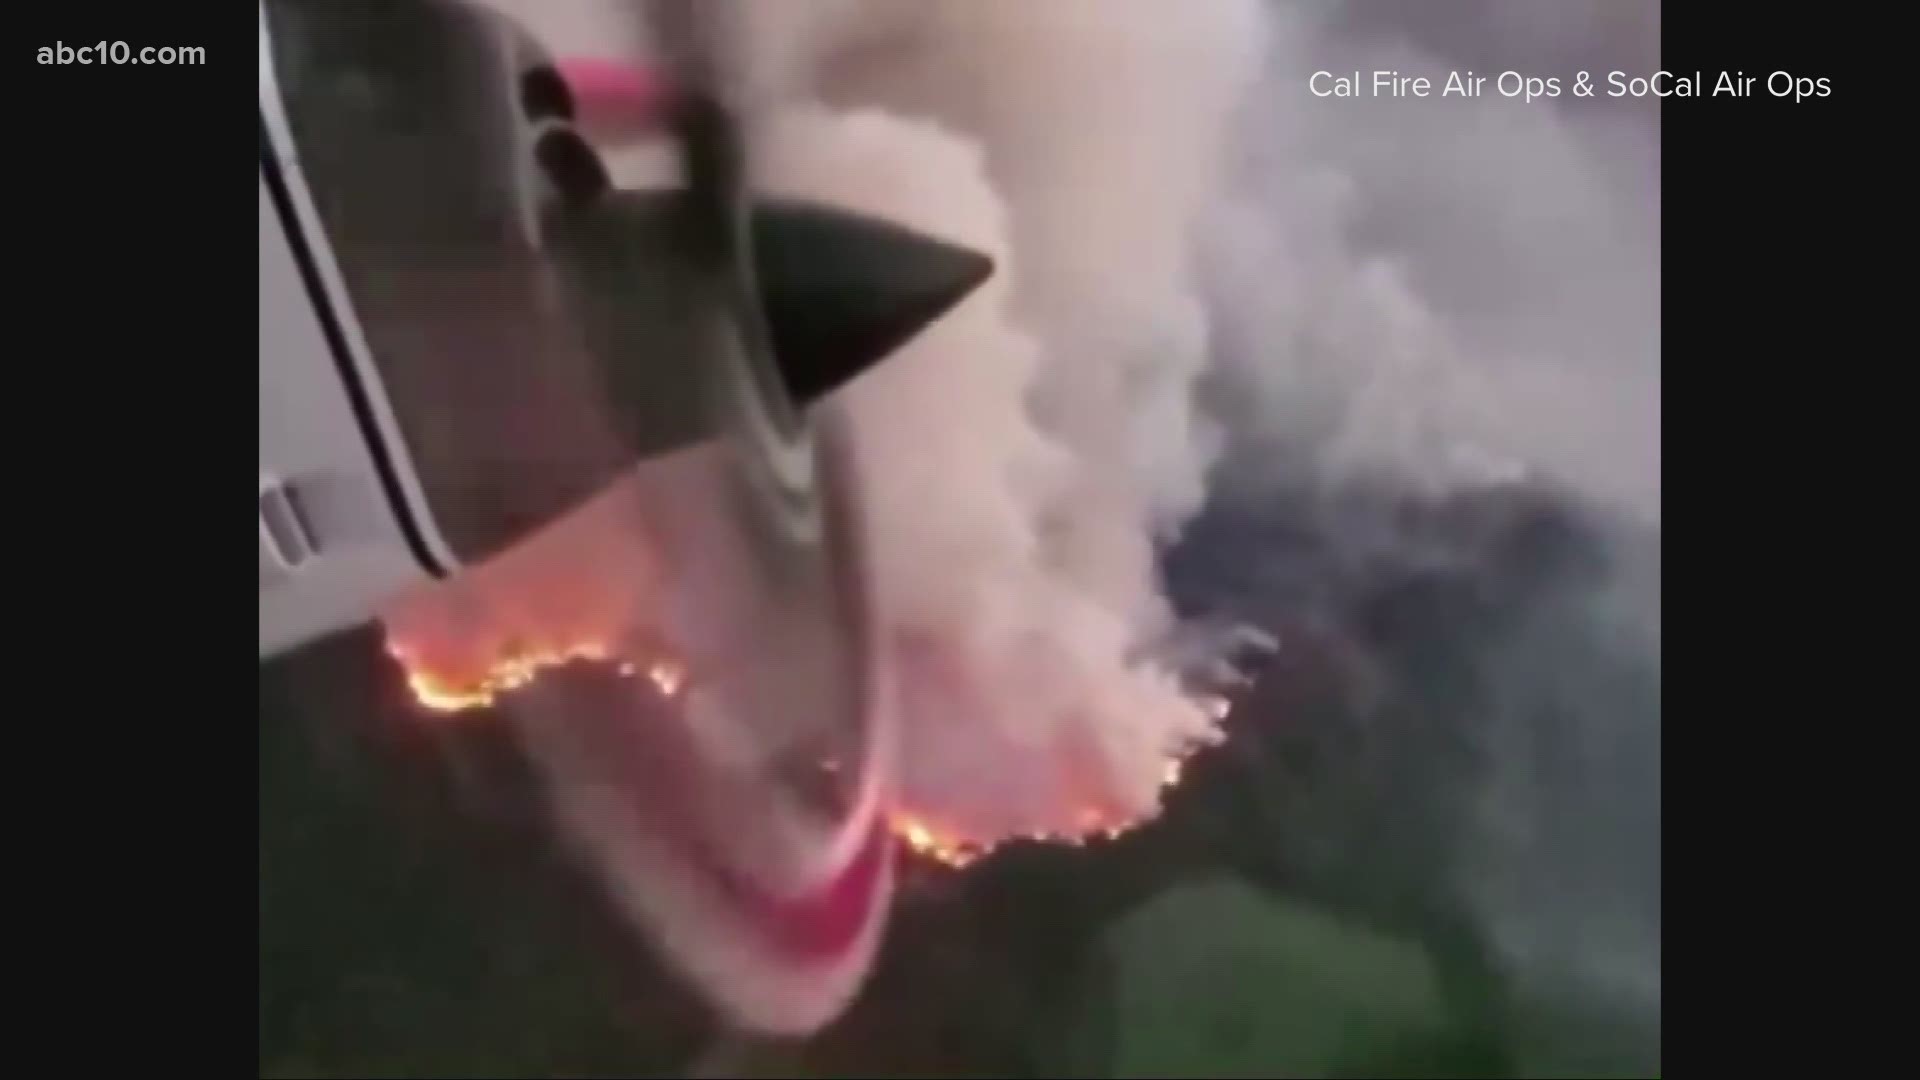 Video from Sept. 30: The fire, which started on Sunday, is only 2% contained.